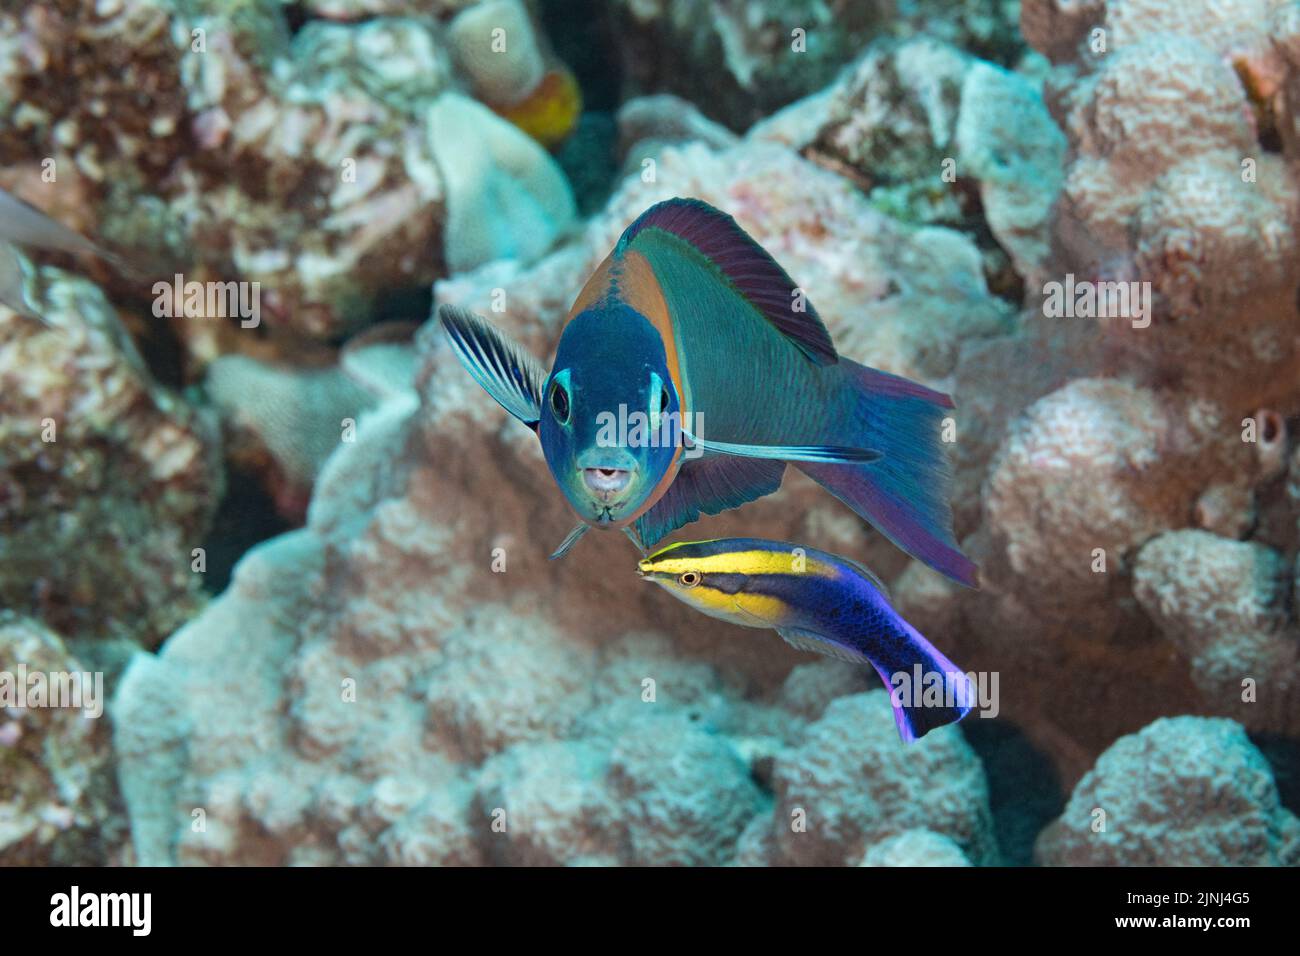 endemic Hawaiian saddle wrasse, Thalassoma duperrey, terminal male, being cleaned by endemic Hawaiian cleaner wrasse, Labroides phthirophagus, Hawaii Stock Photo